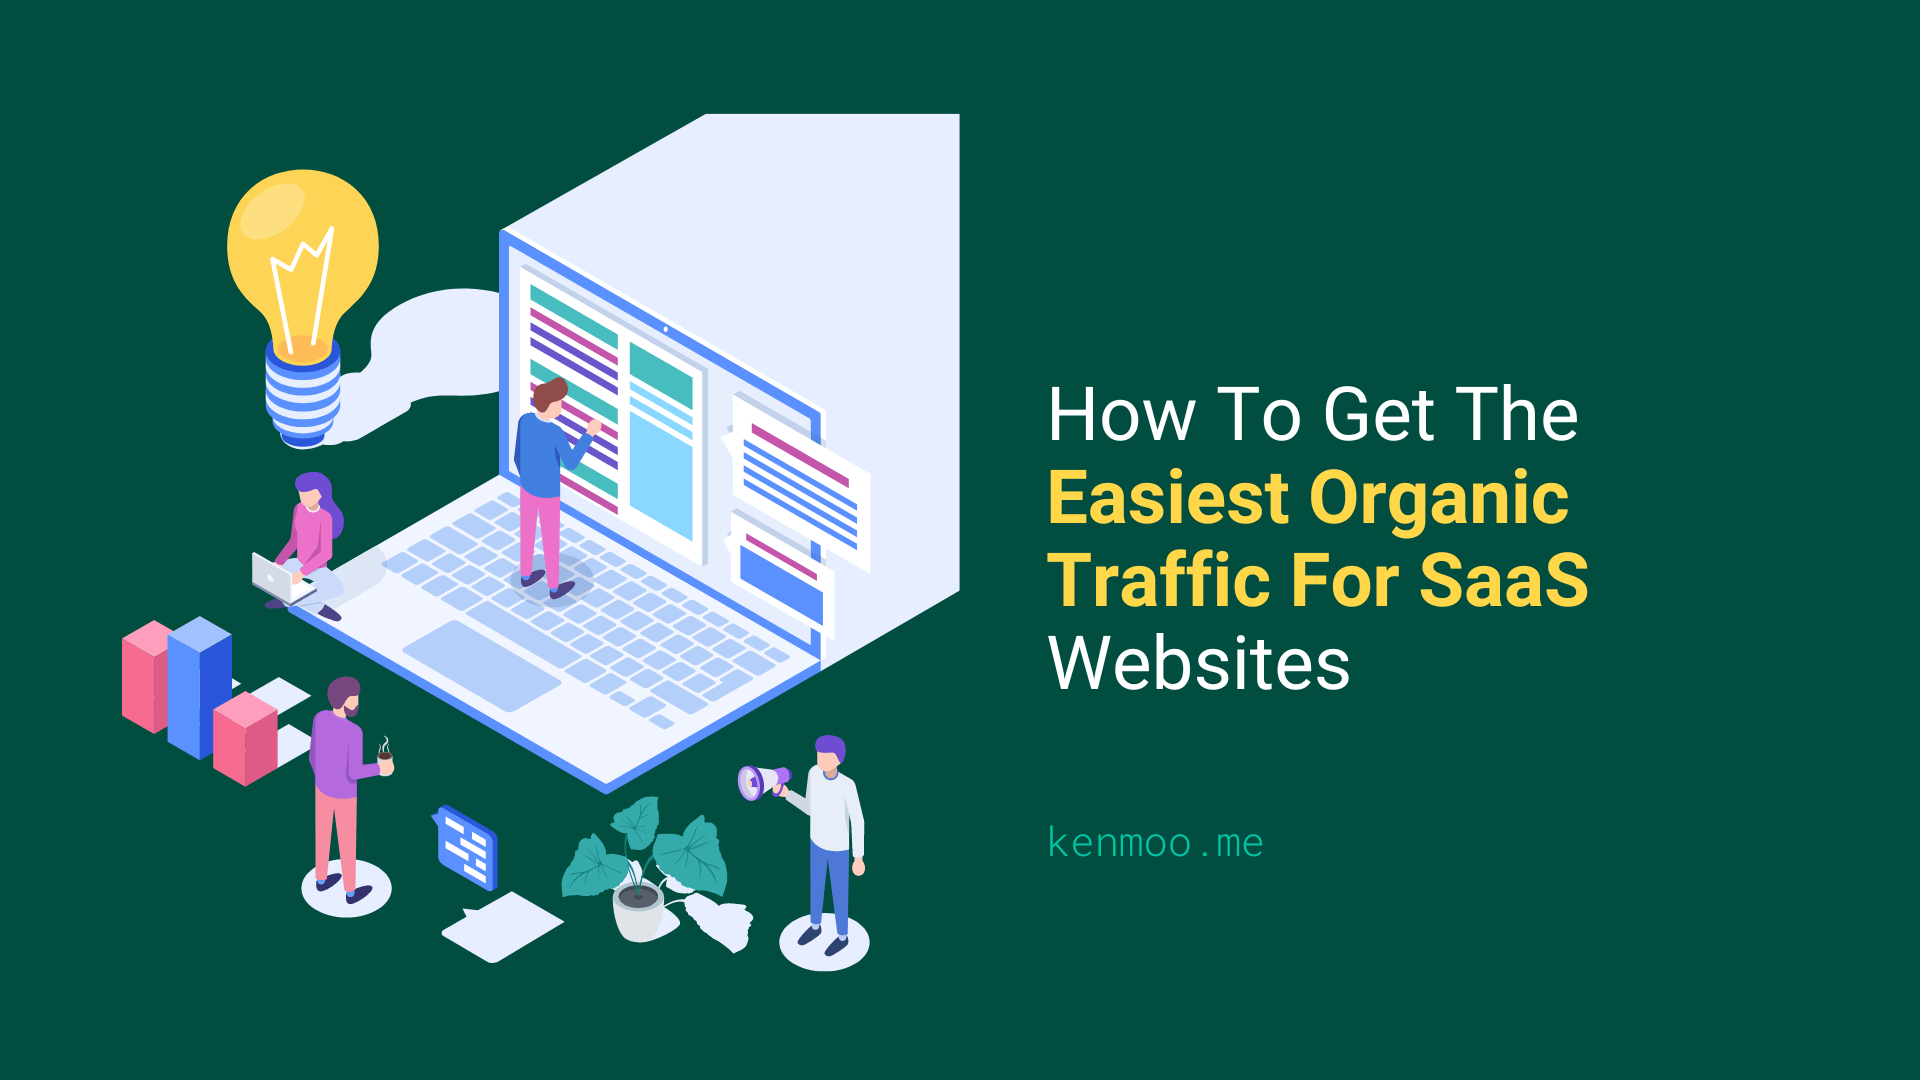 How To Get The Easiest Organic Traffic For SaaS Websites